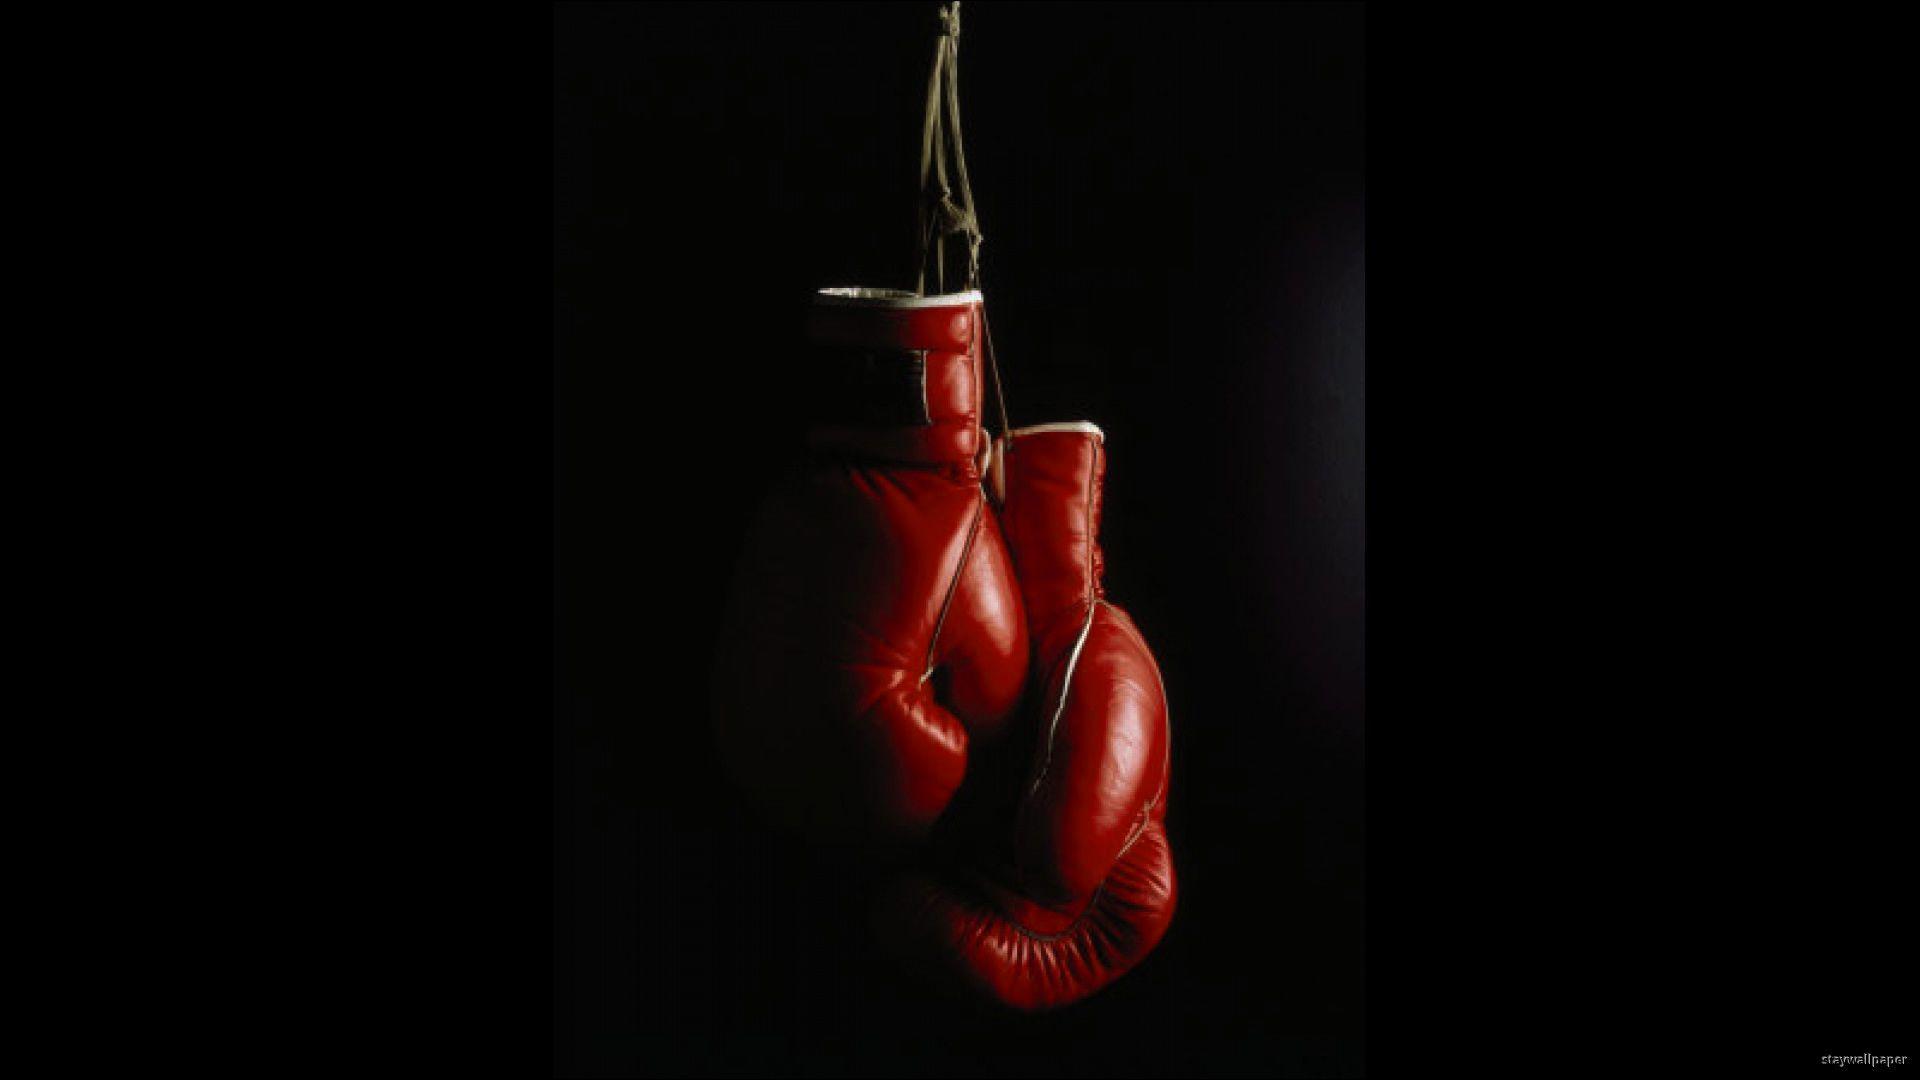 Boxing Wallpaper 640×960 Boxing wallpaper for iphone 4 (29 Wallpaper). Adorable Wallpaper. Boxing gloves, Love wallpaper, Wallpaper for iphone 4